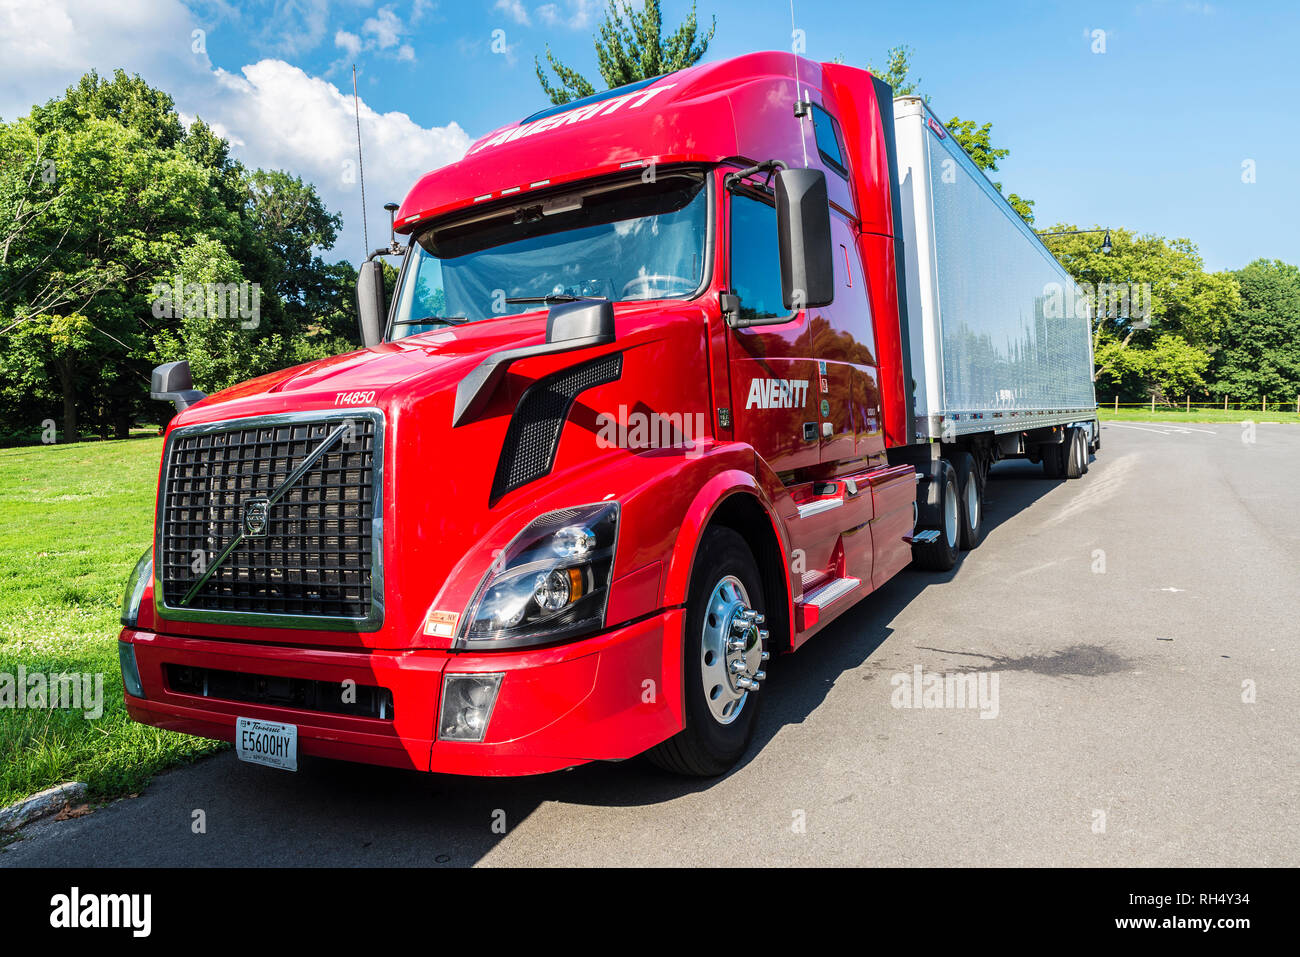 New York City, USA - July 26, 2018: Heavy red and white truck of the Volvo brand equipped with refrigeration goods parked in a Central Park, Manhattan Stock Photo